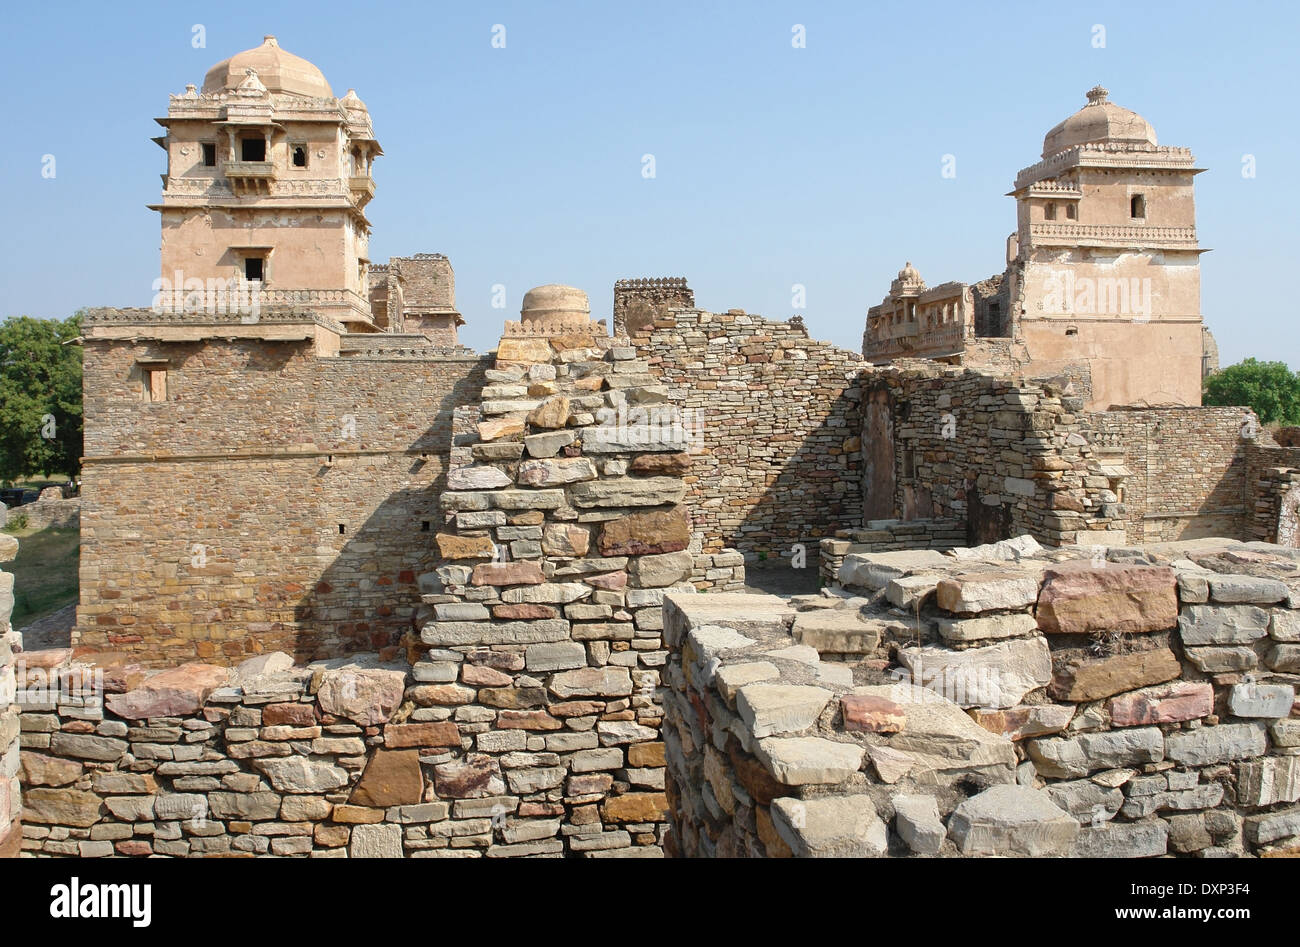 Chittorgarh Fort located in Rajasthan (India) at evening time Stock Photo